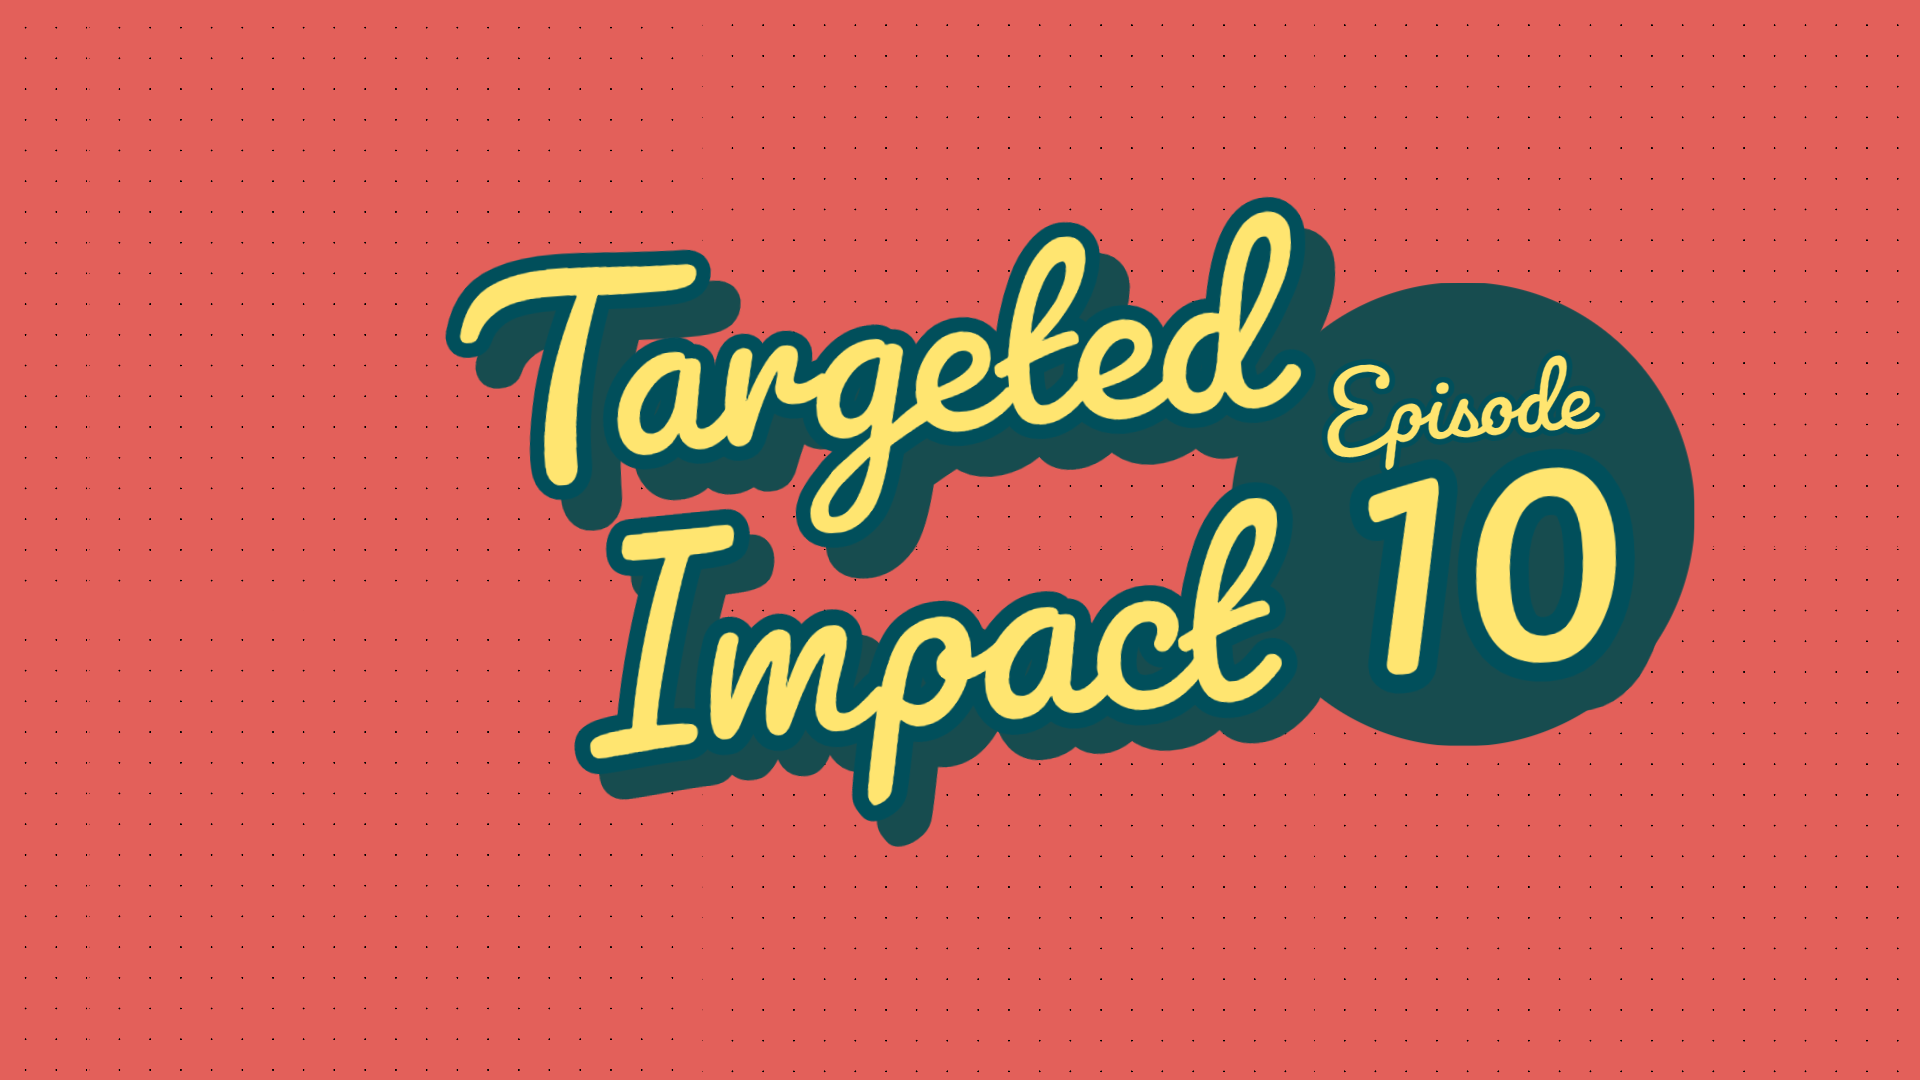 Targeted-impact-10